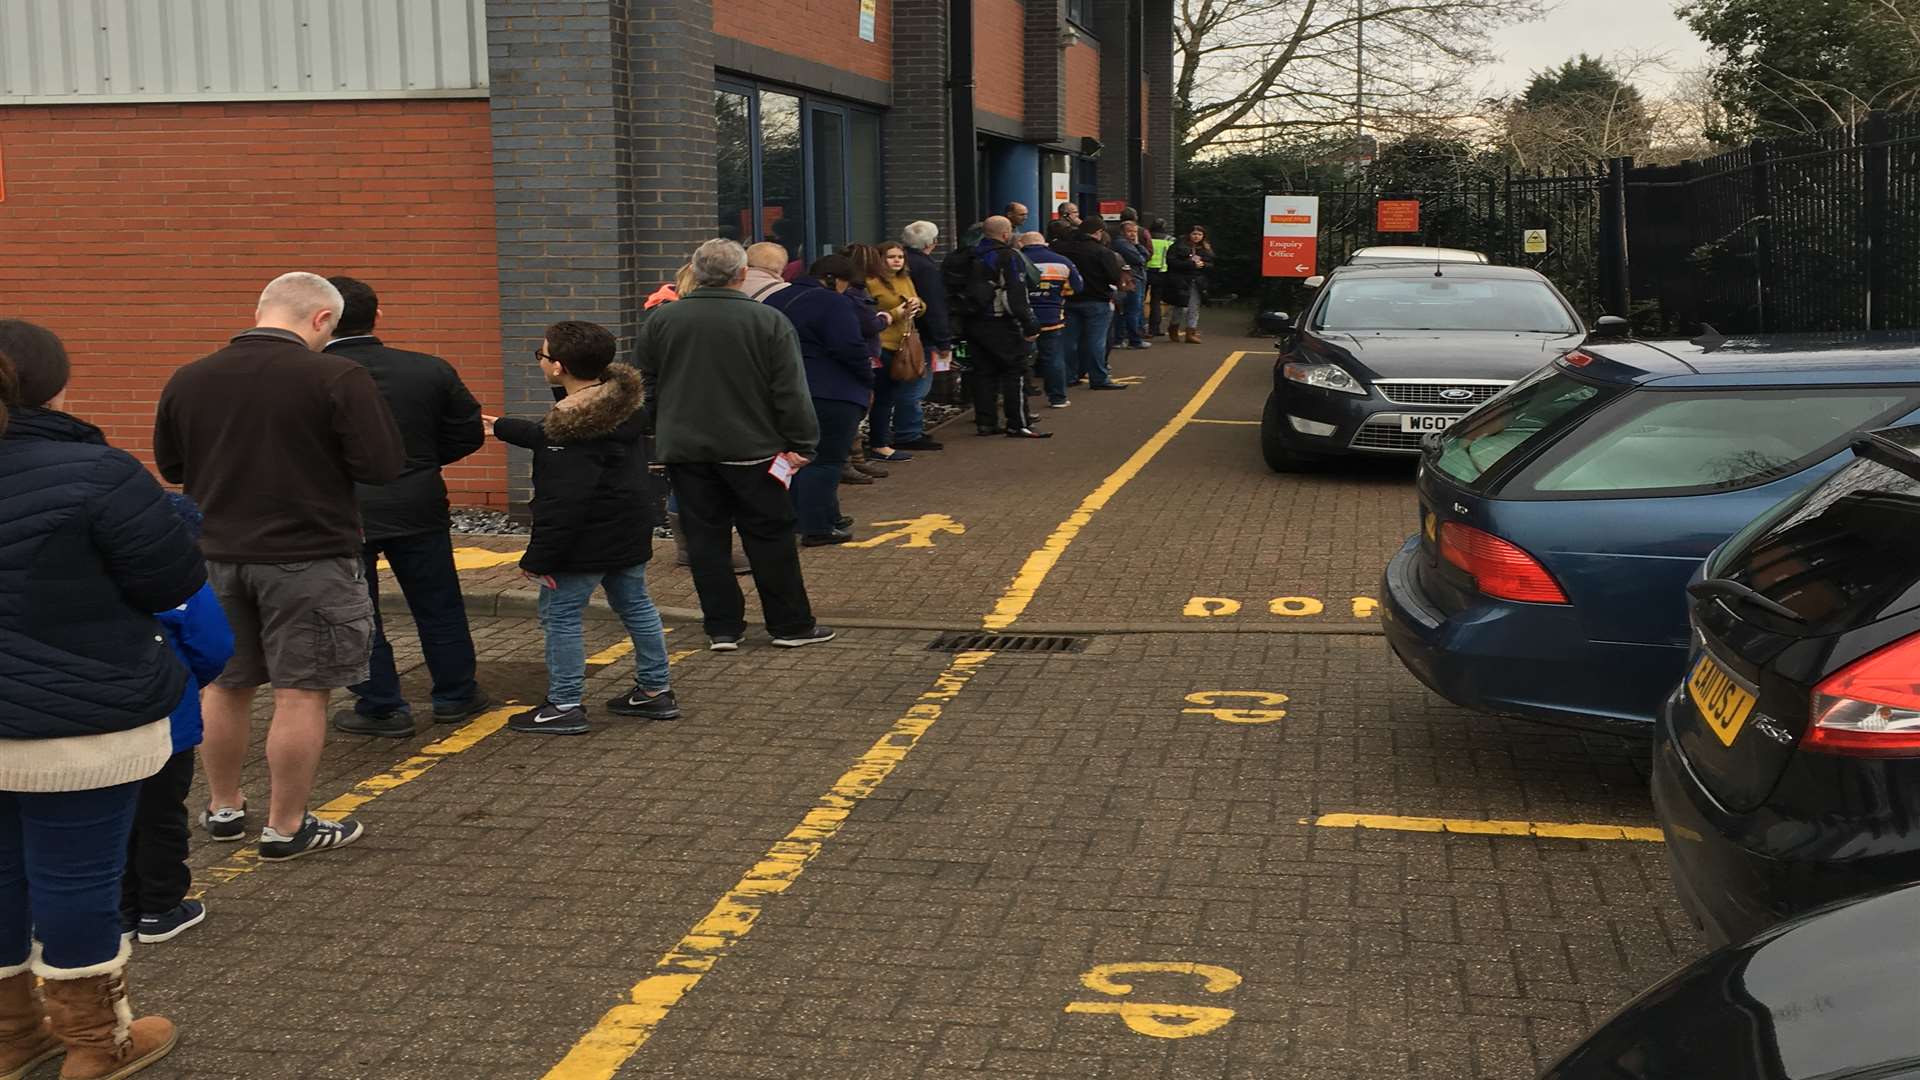 A photo sent by a customer reportedly shows only half the queue.